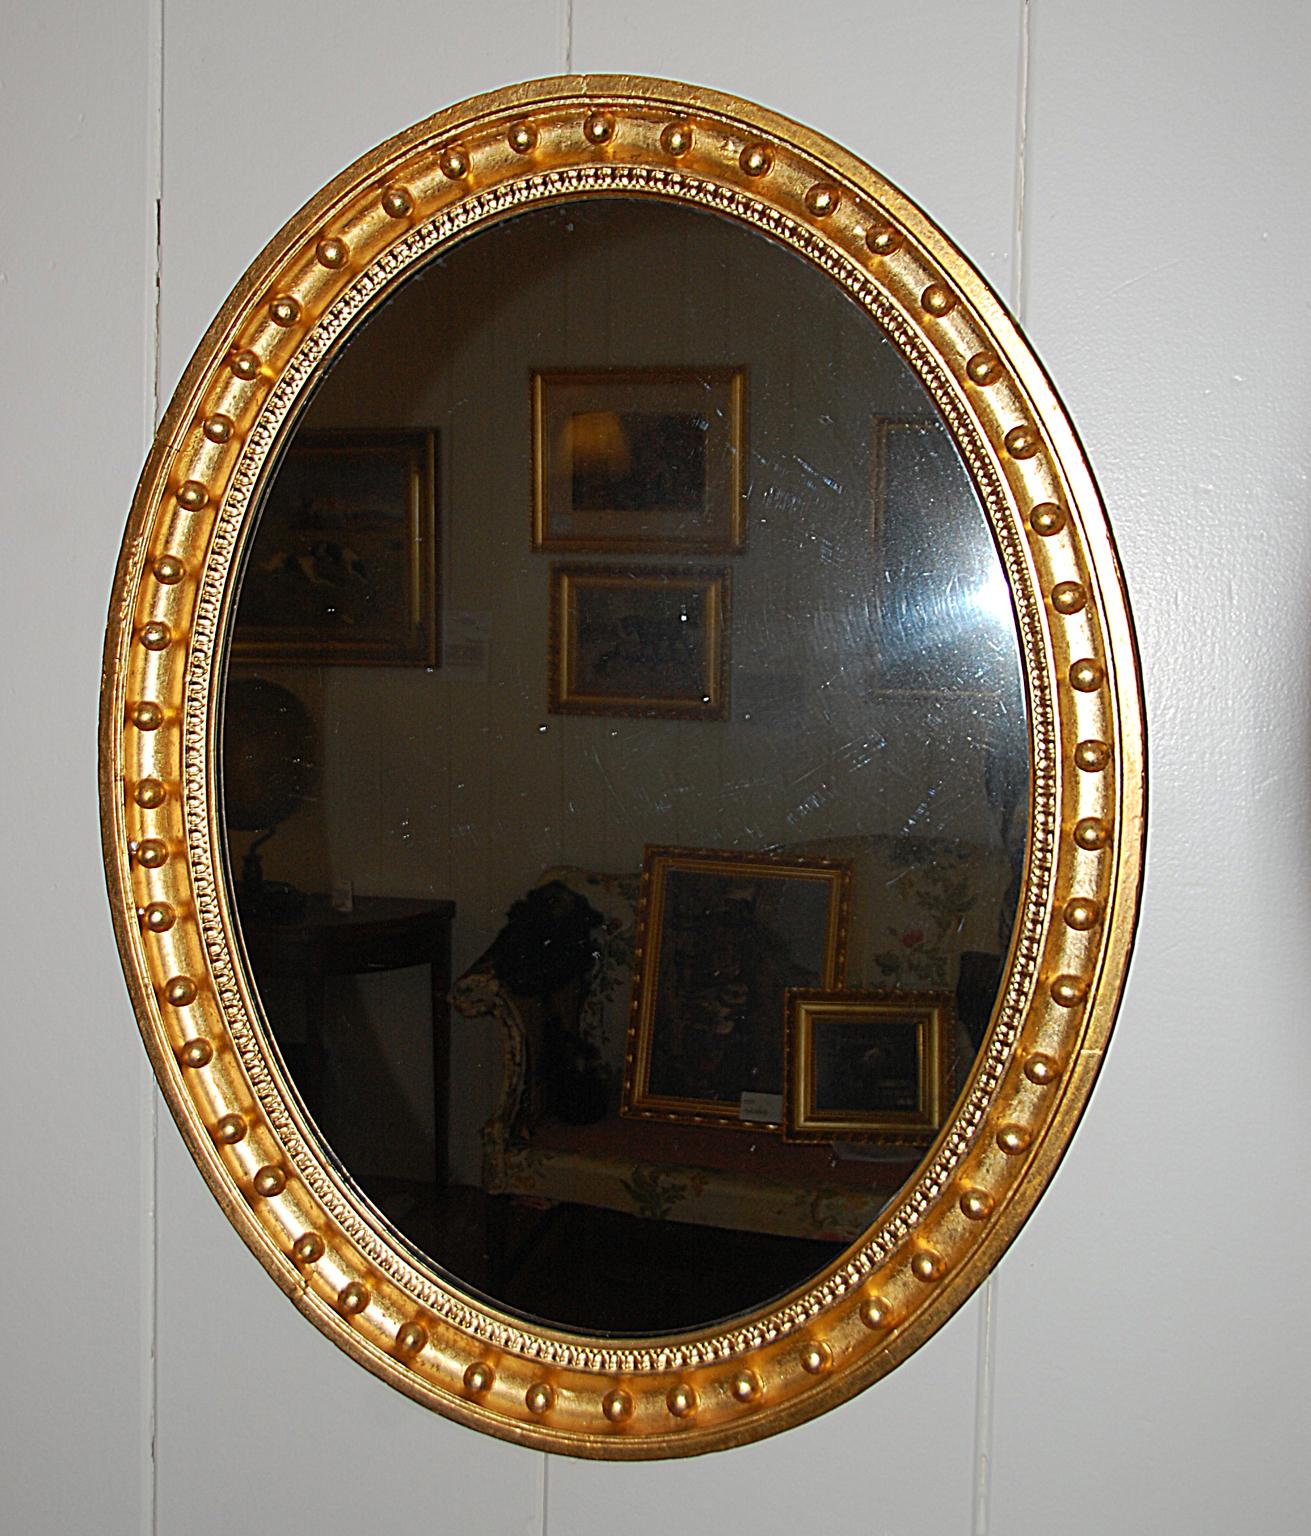 English mid-19th century carved oval gold leaf mirror with balls in its concave molding, leaf motif next to plate mirror. It is unusual to have an oval mirror with balls surrounding the edge, usually this is reserved for round convex mirrors. The